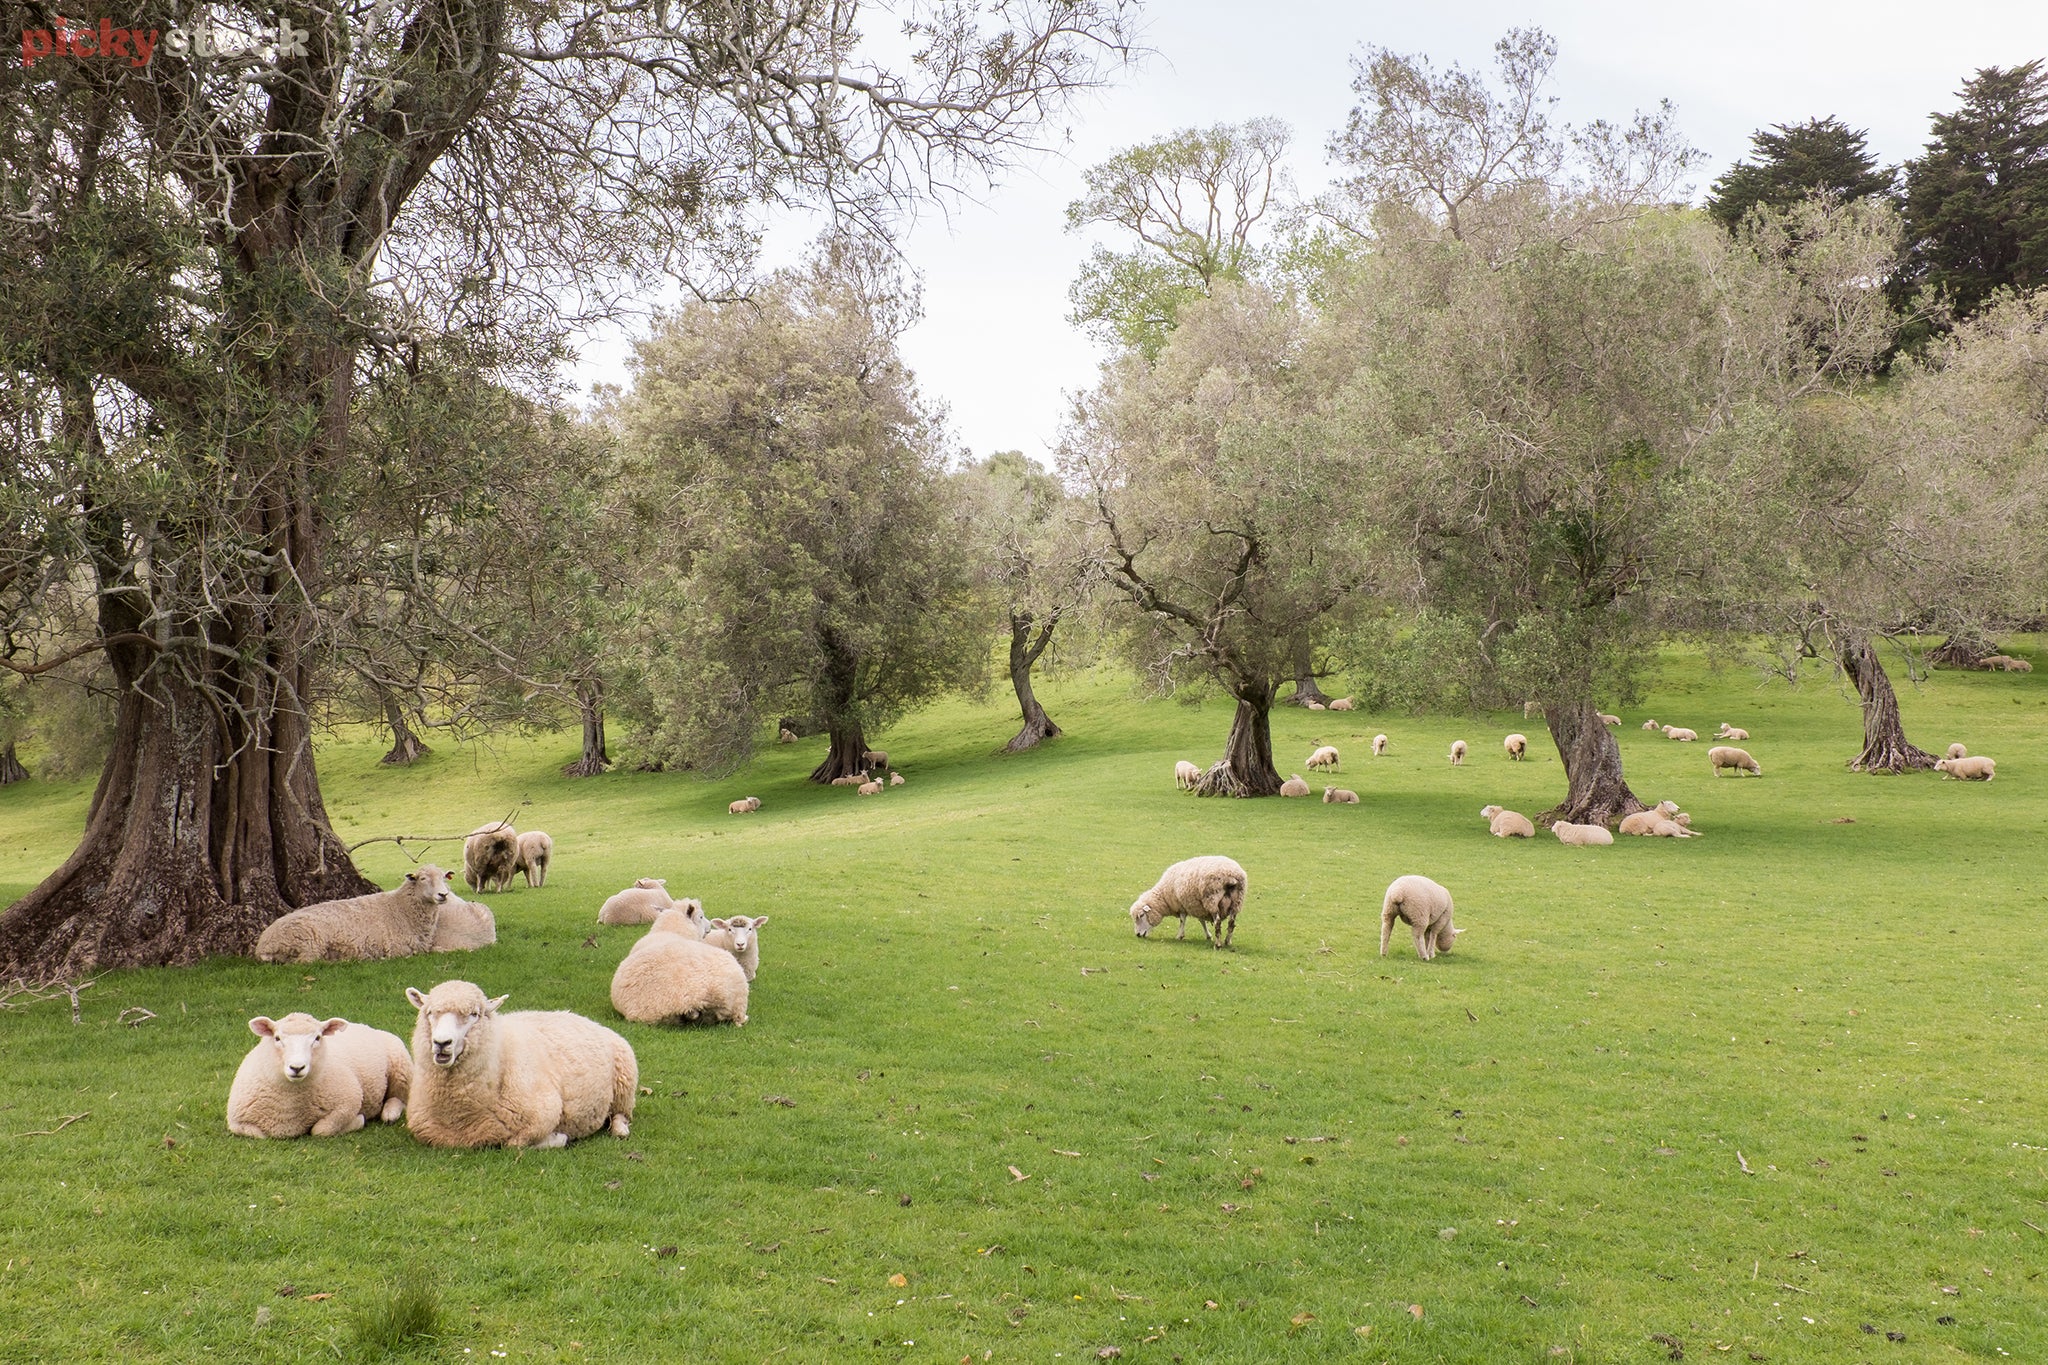 Landscape of a herd of sheep grazing in a meadow, many of them resting beneath a cluster of tall dark trees with twisting bodies.